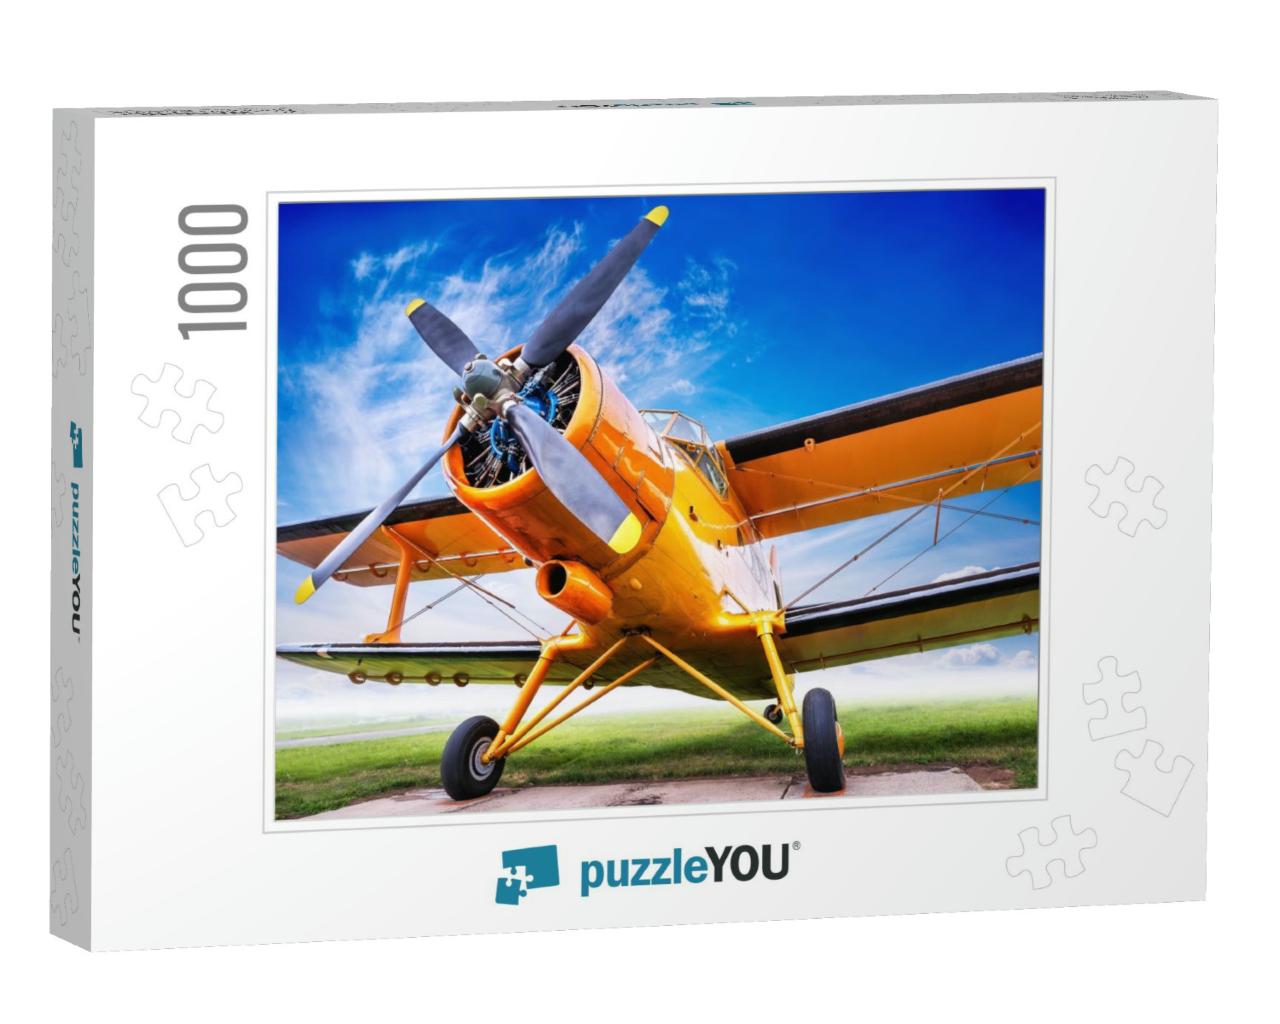 Biplane Against a Cloudy Sky... Jigsaw Puzzle with 1000 pieces